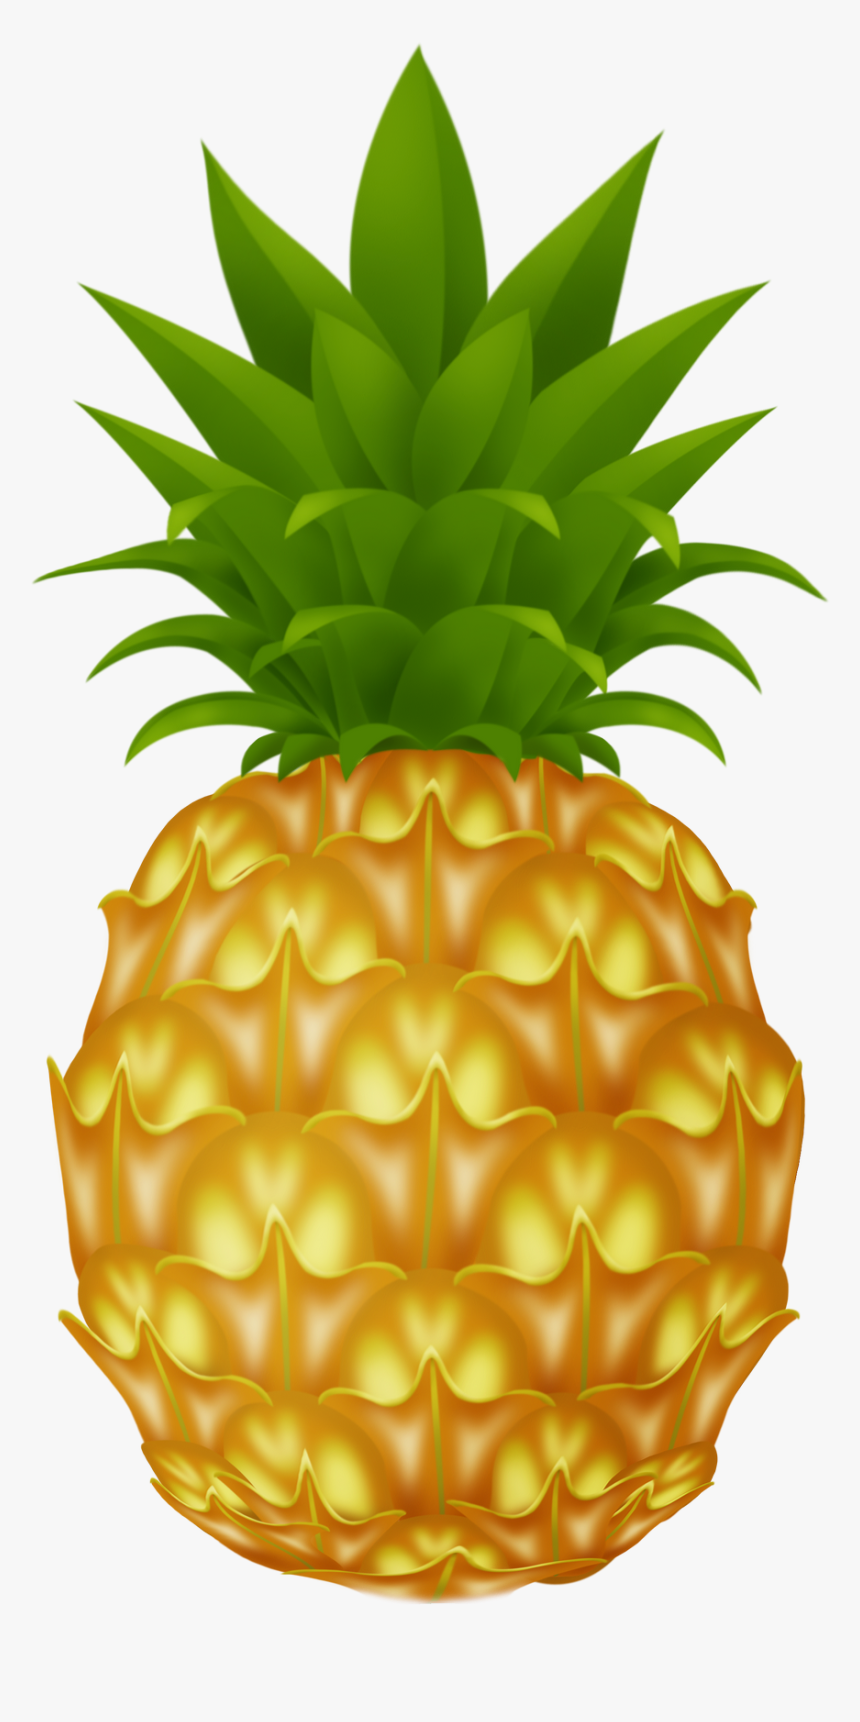 Pineapple Png Image.